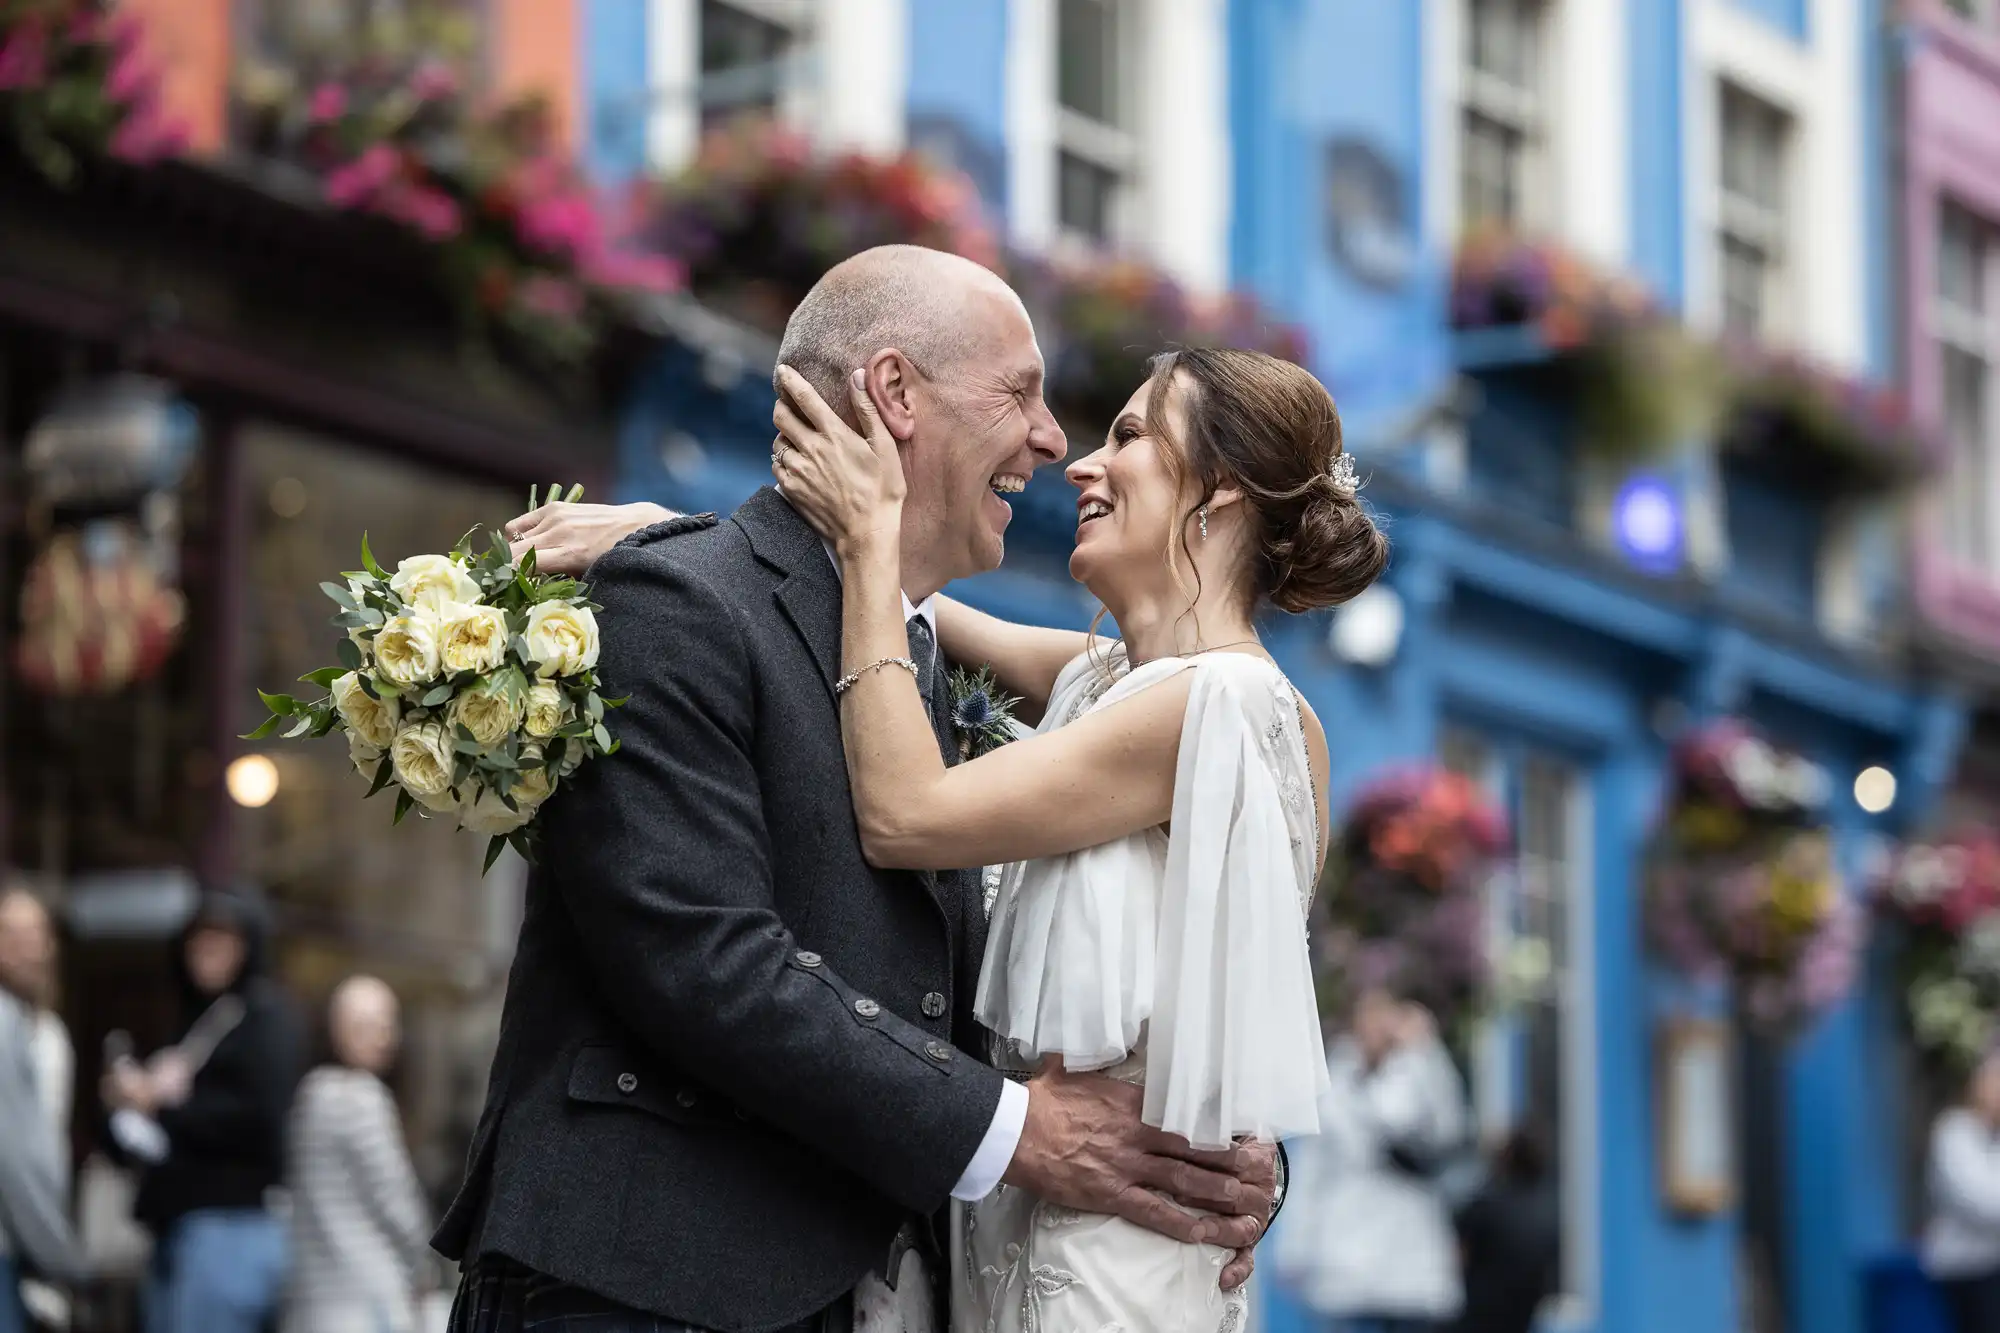 A couple in wedding attire embraces and smiles at each other while standing on a colorful street adorned with flowers.